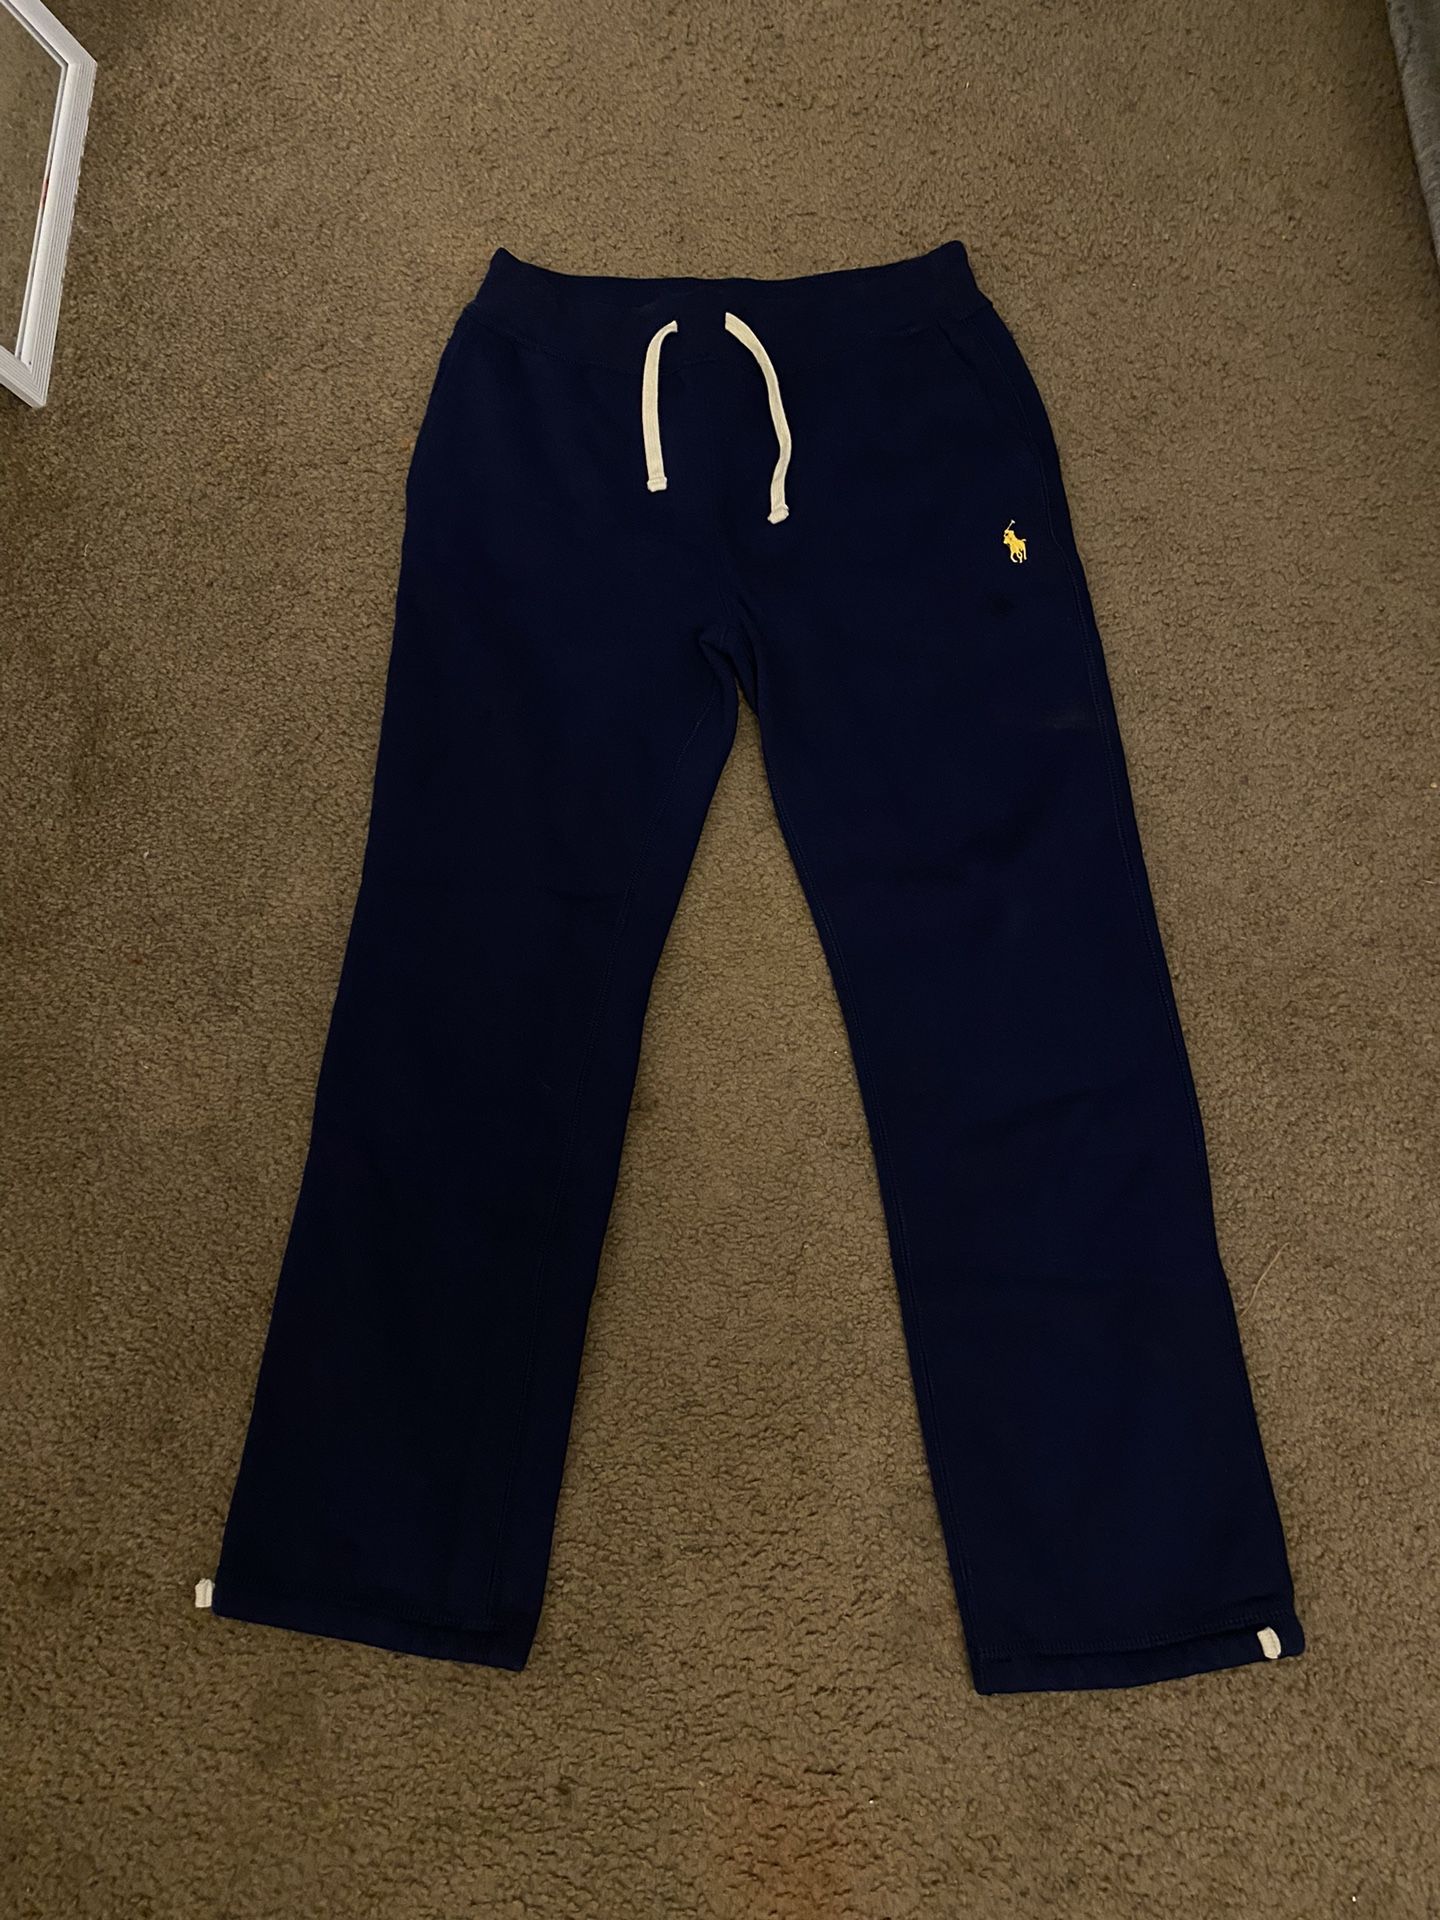 Polo Ralph Lauren Joggers Size Small